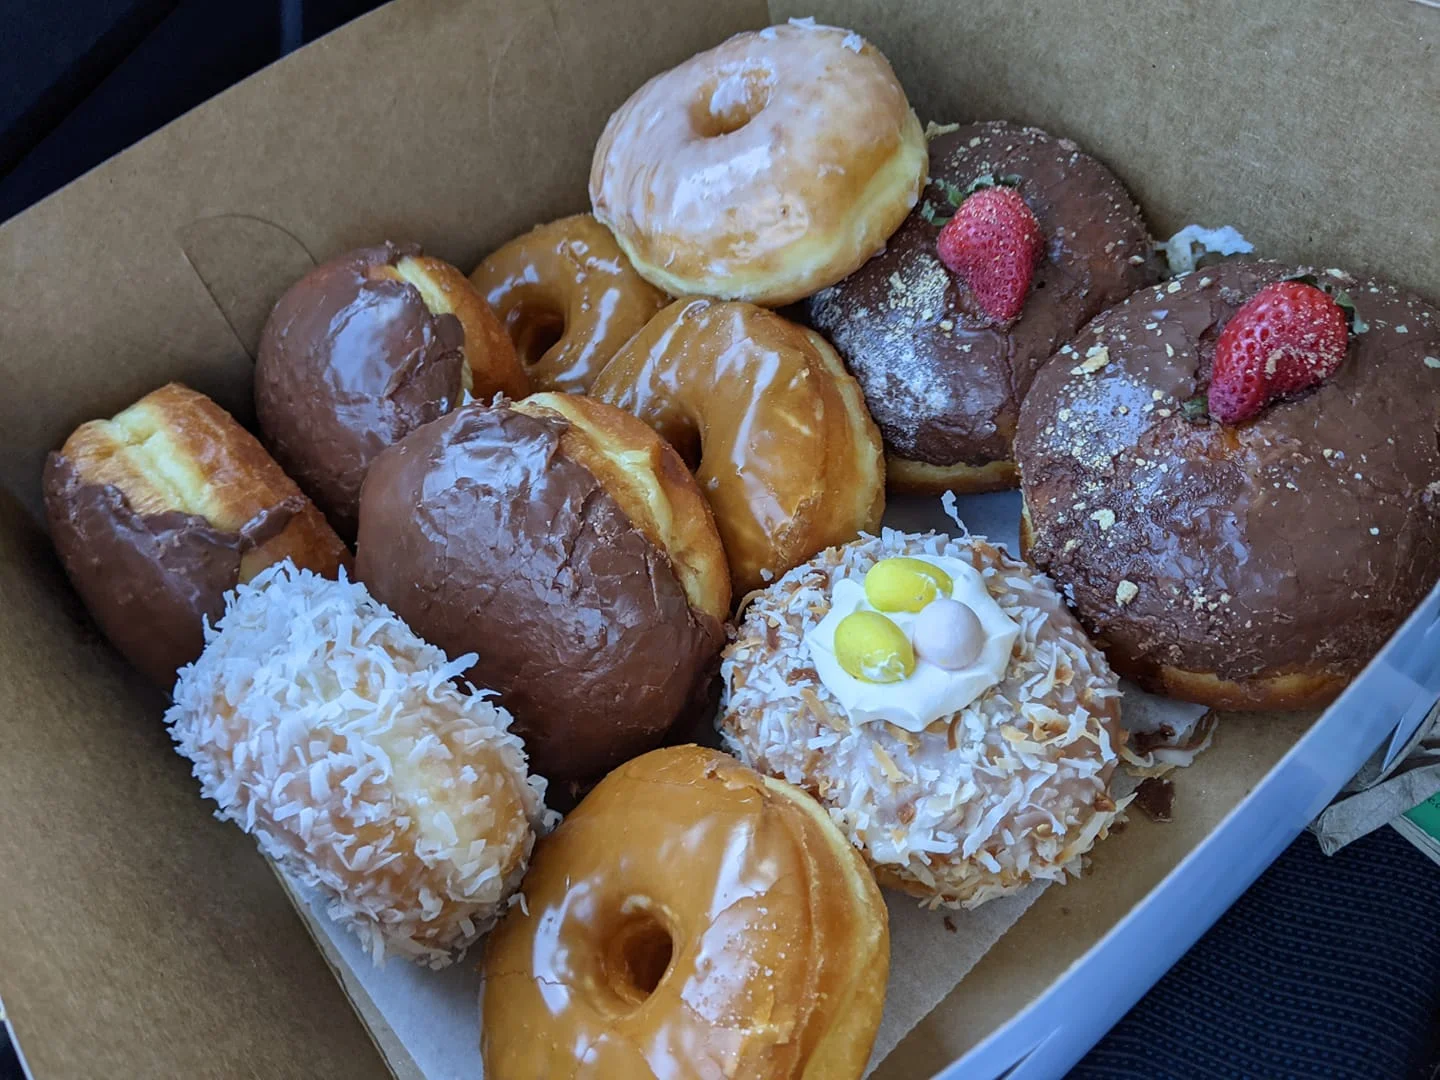 The Sour Cream Donut - Early Bird Donuts